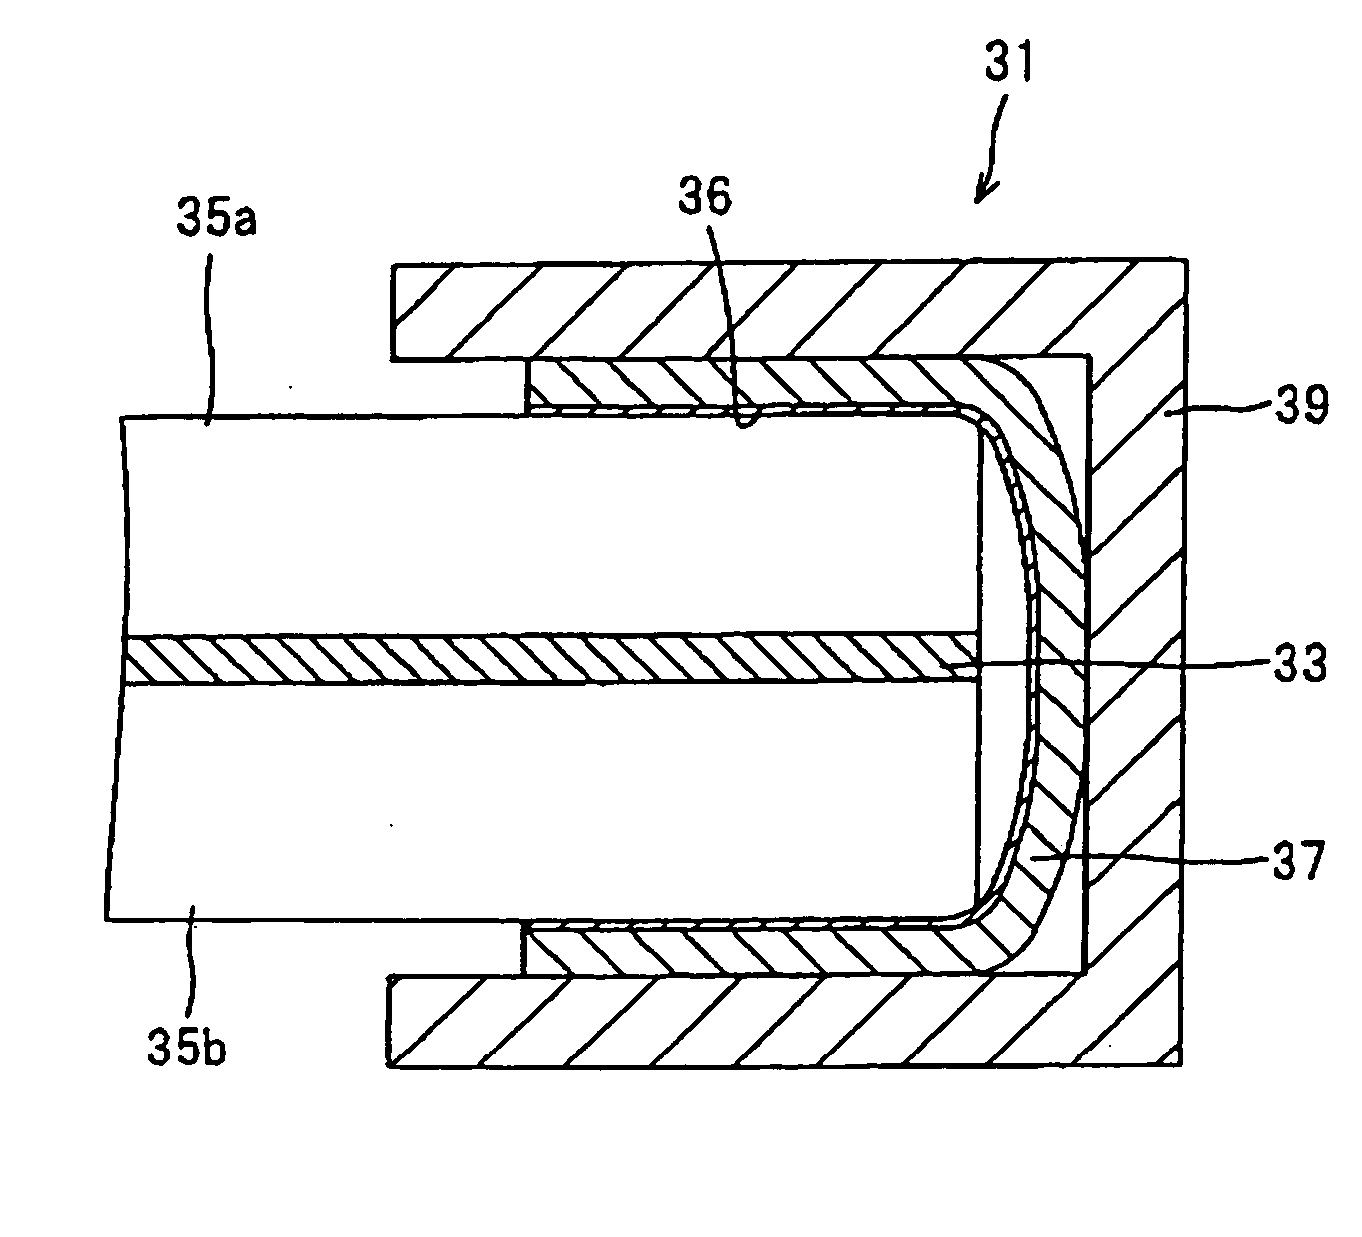 Electromagnetic wave shielding window, manufacturing apparatus having the same, transport system having the same, building construction having the same, and electromagnetic wave shielding method